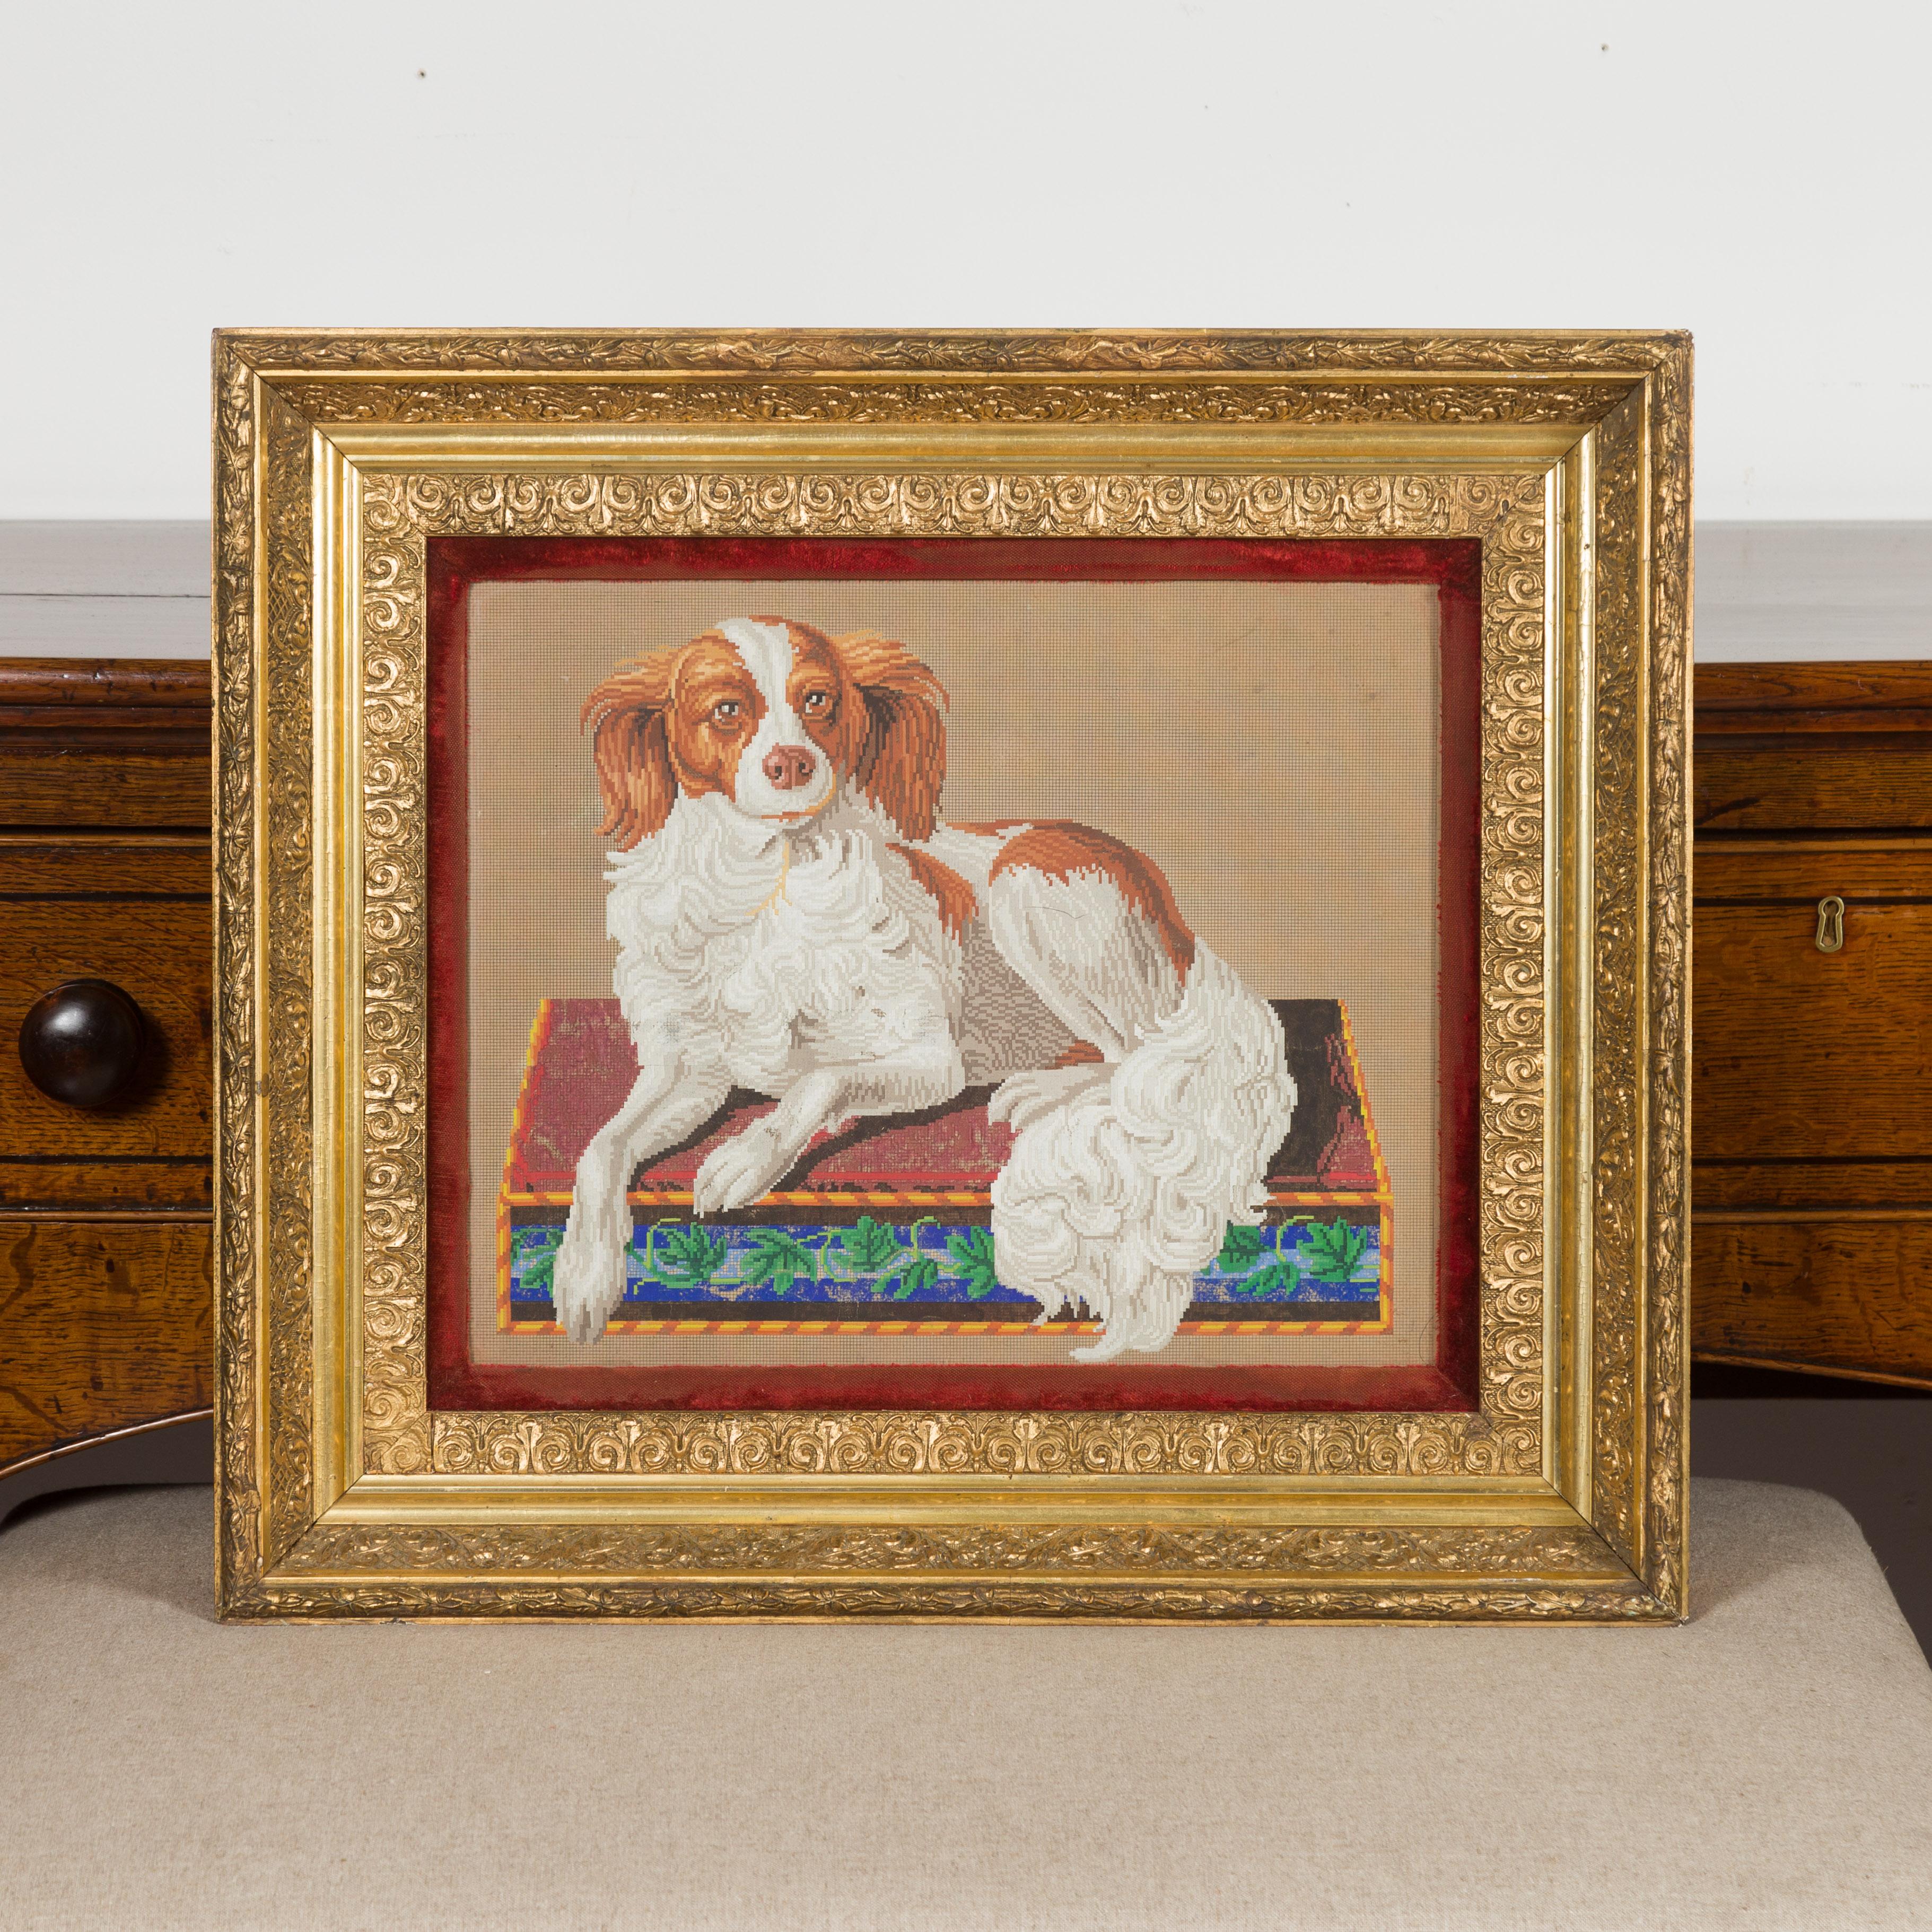 An English framed template for needlepoint from the late 19th century, depicting a spaniel. Created in England during the last quarter of the 19th century, this needlepoint template features a spaniel dog gracefully resting on a rectangular box